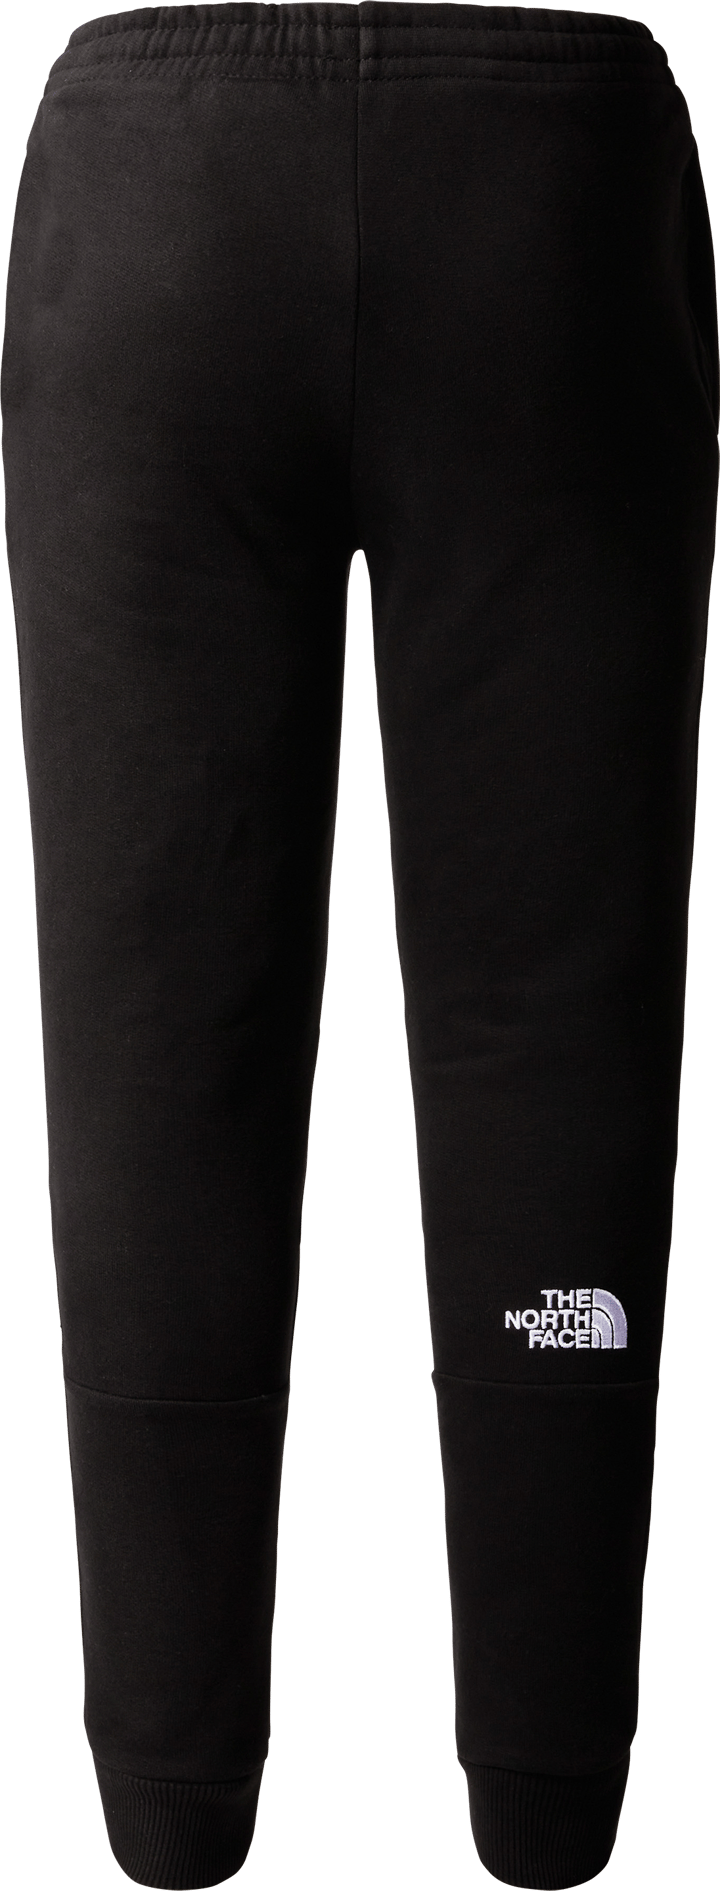 Teens' Slim Fit Joggers TNF BLACK The North Face